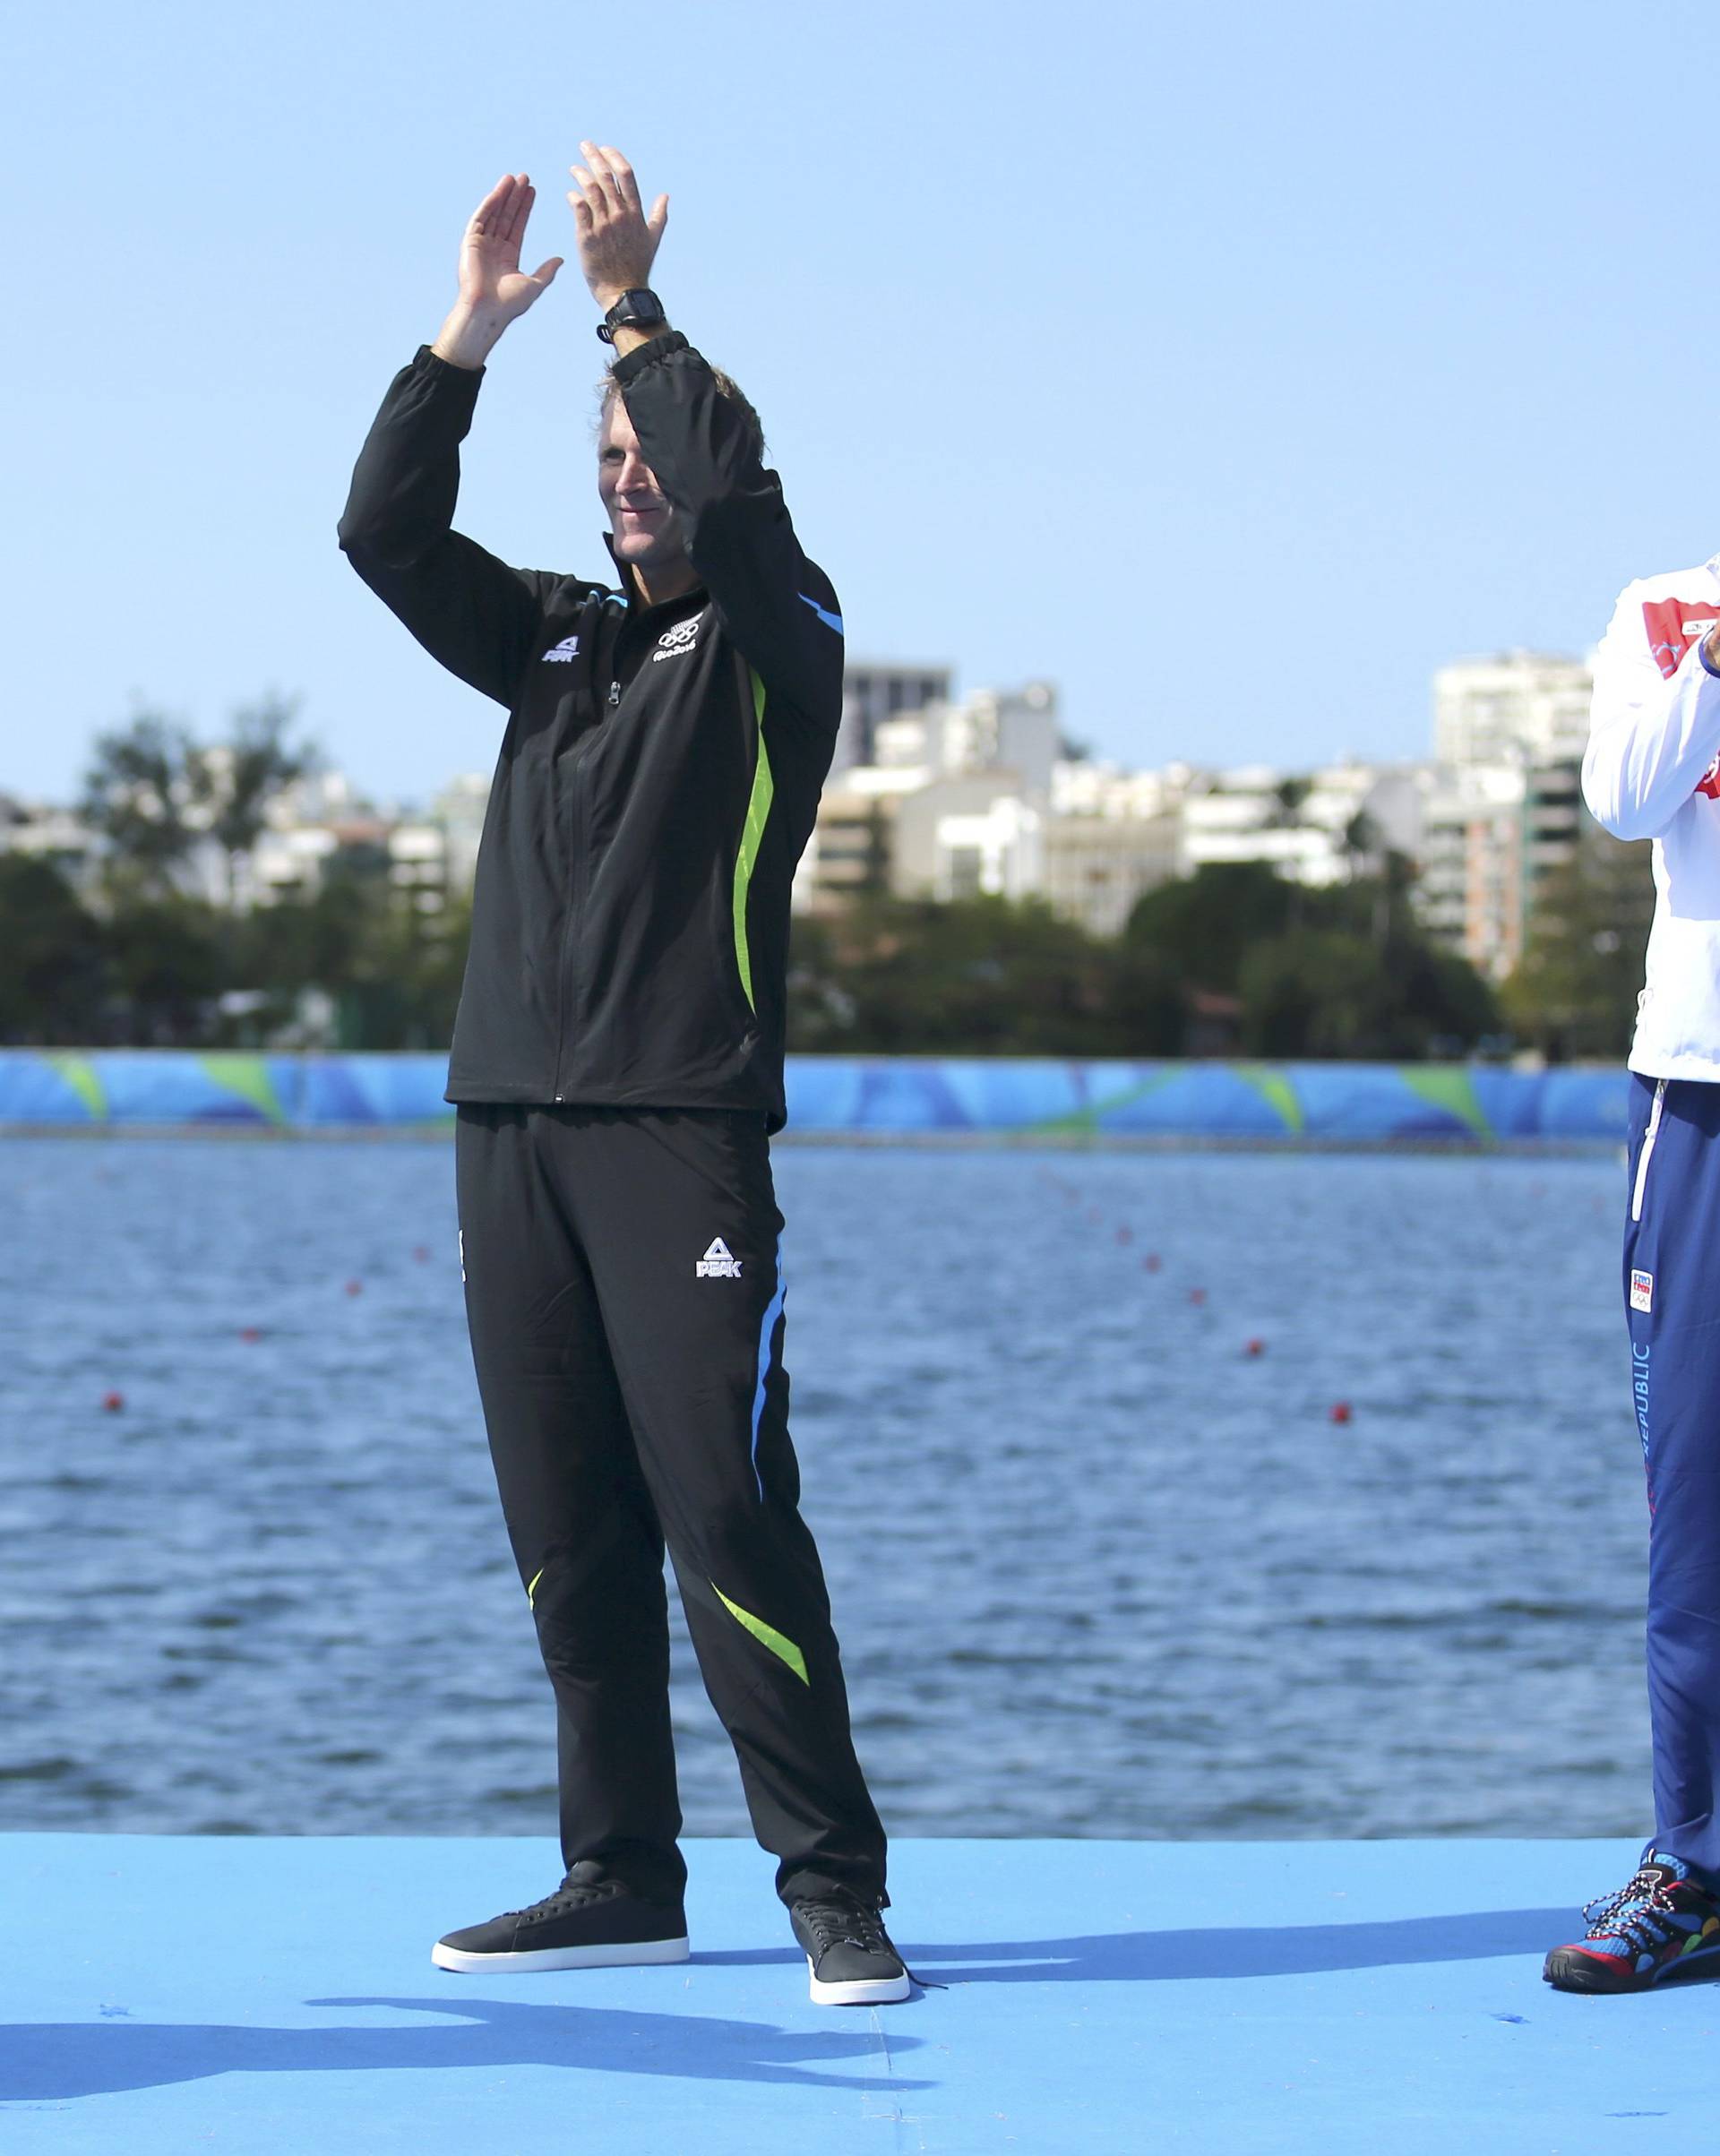 Rowing - Men's Single Sculls Victory Ceremony